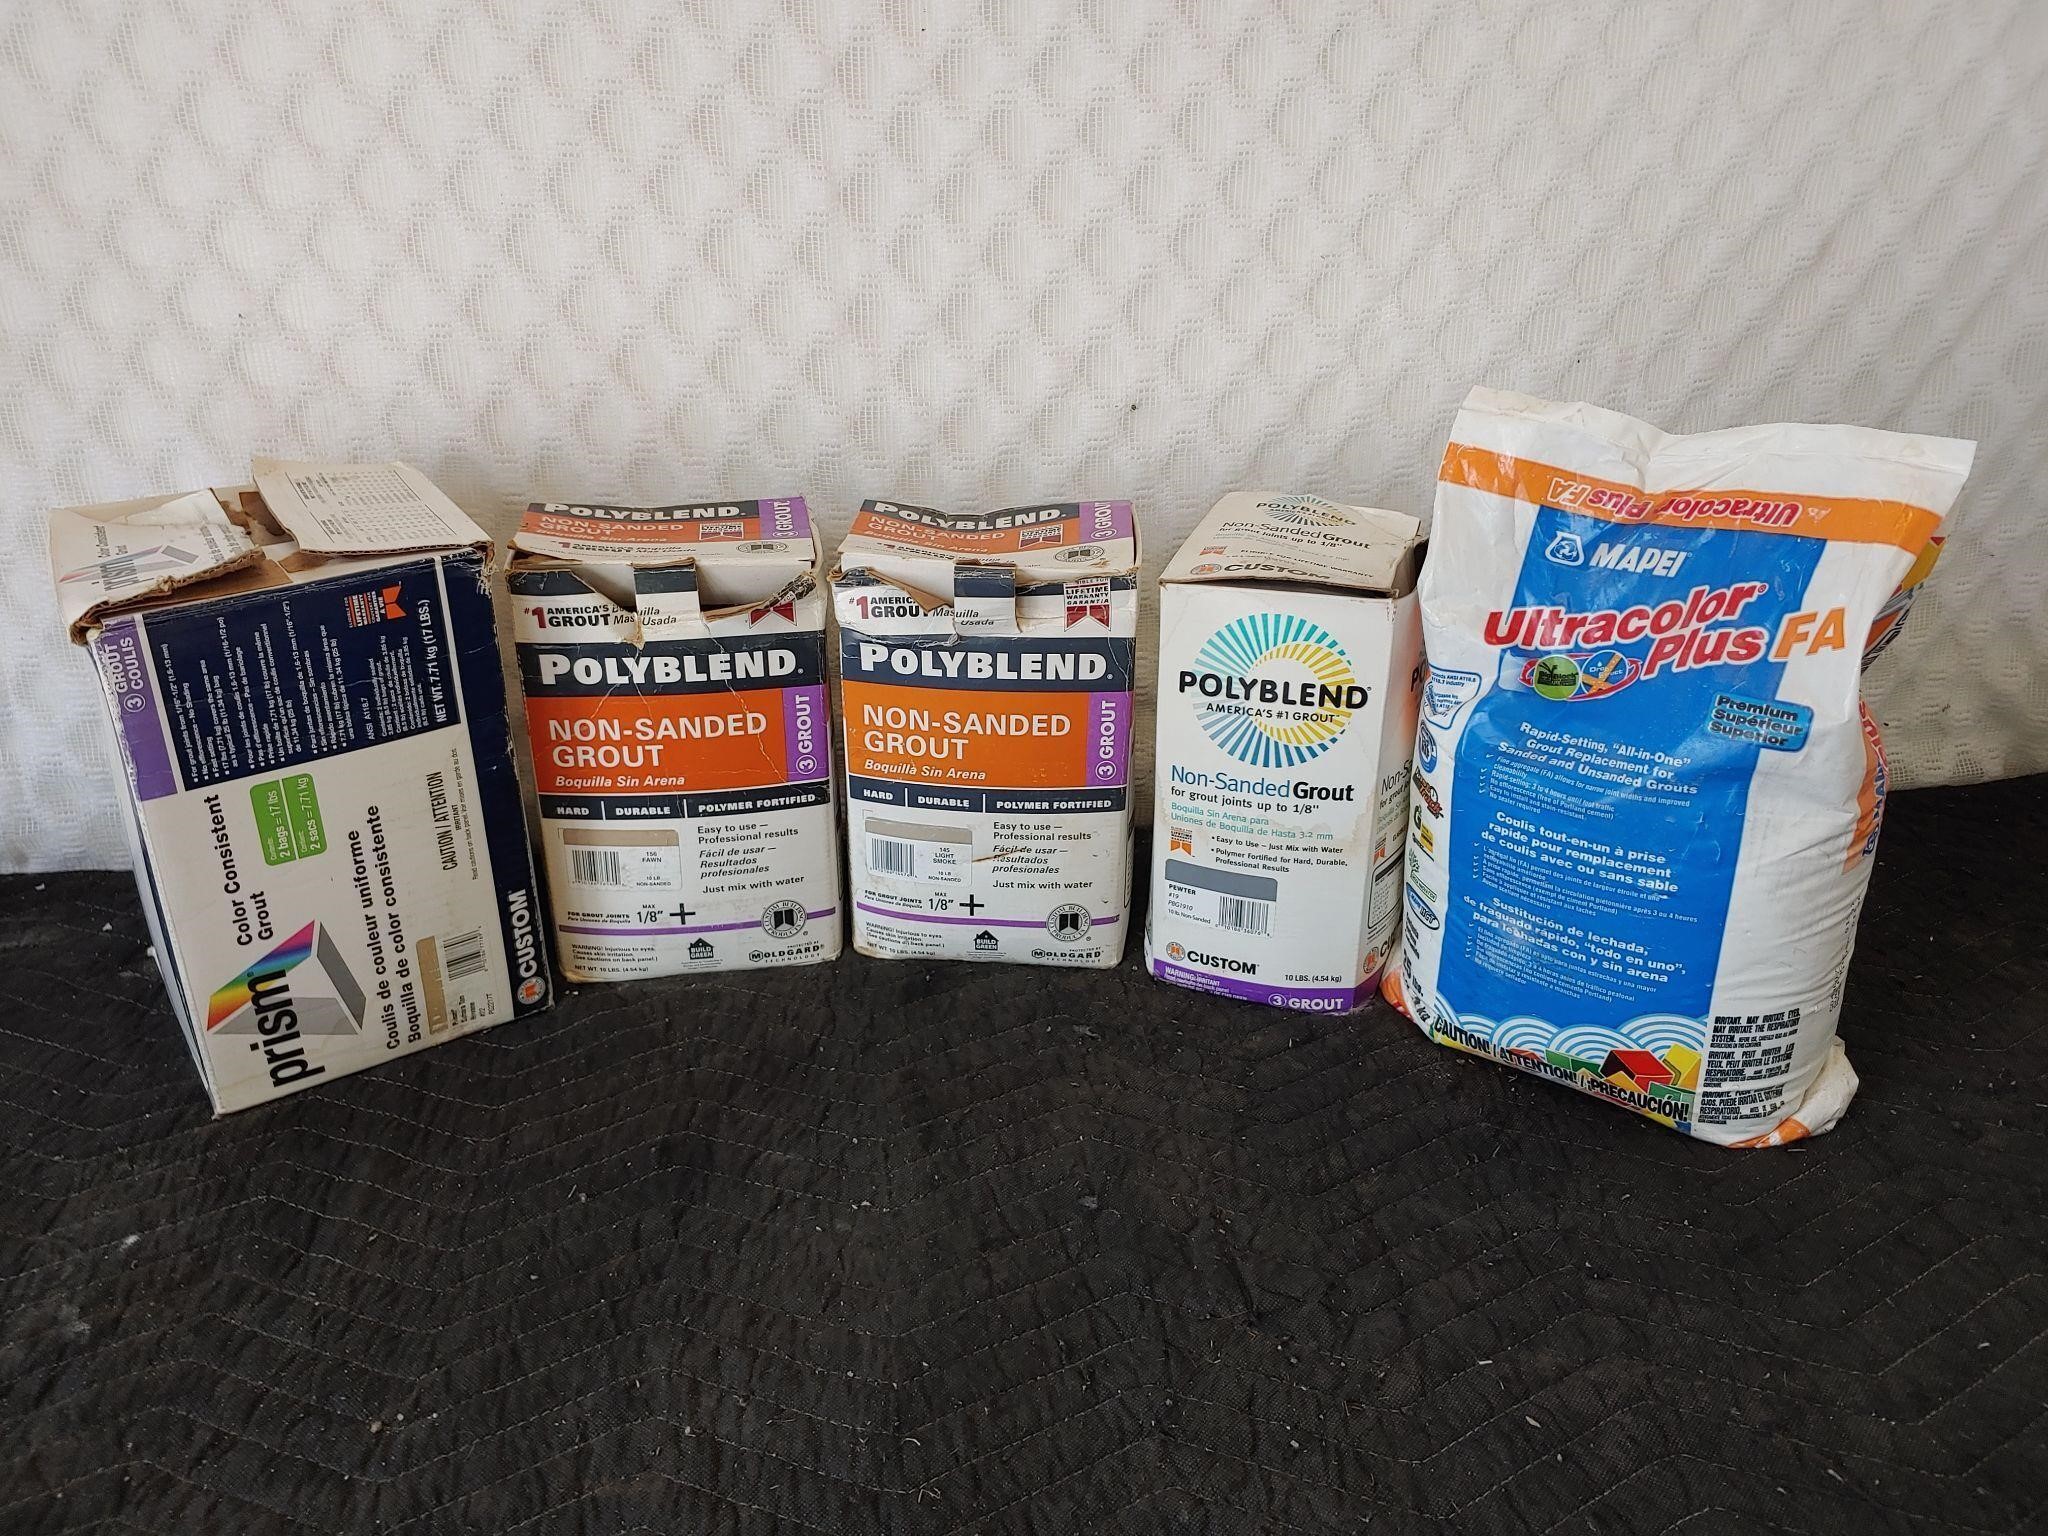 5 packages of Non-Sanded Grout